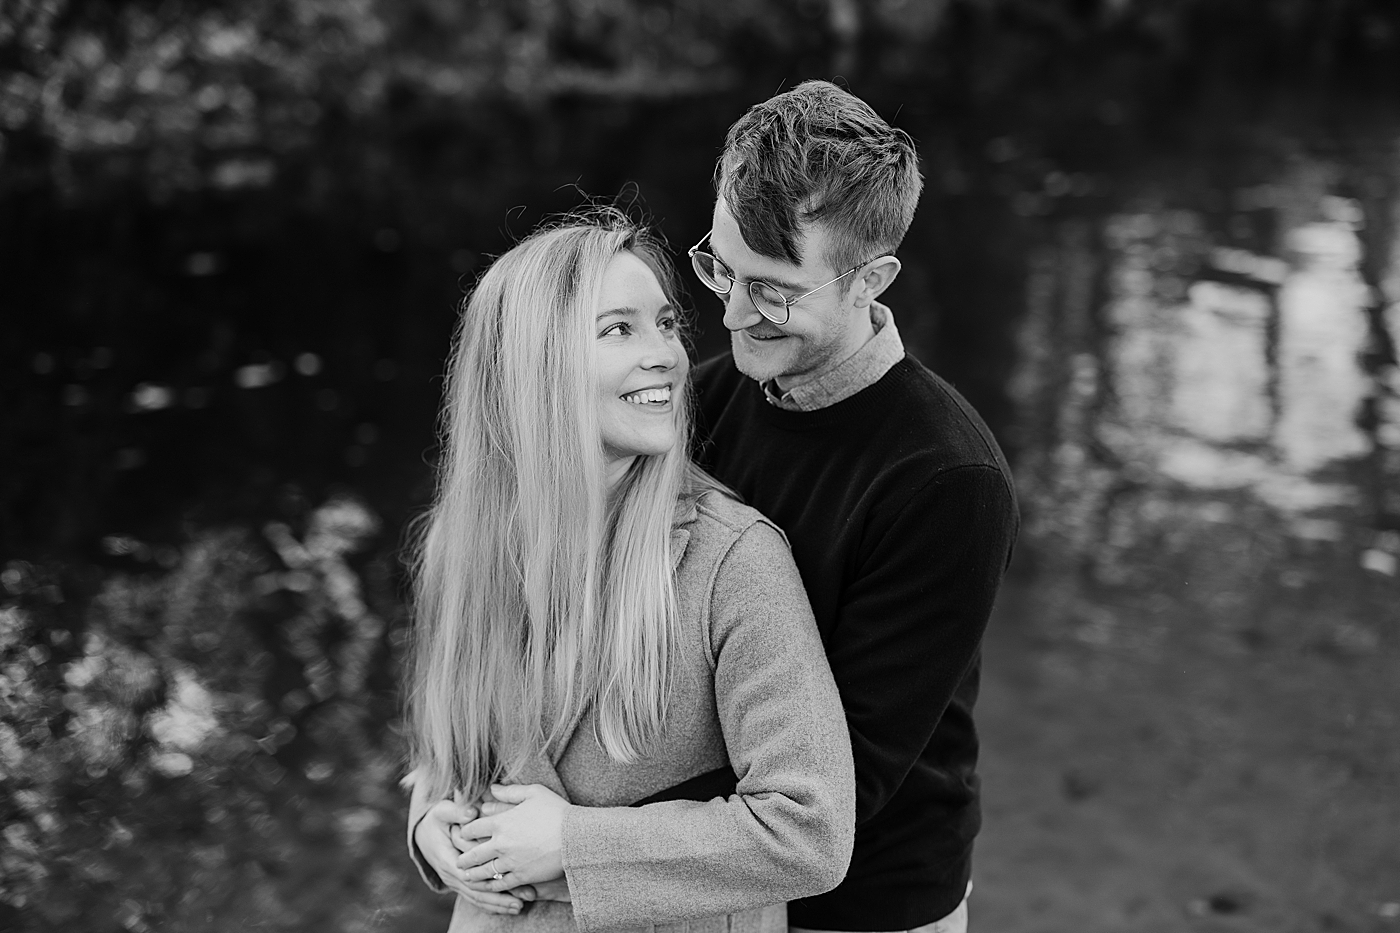 Black and white engagement session photo. Photo by Megan Montalvo Photography.